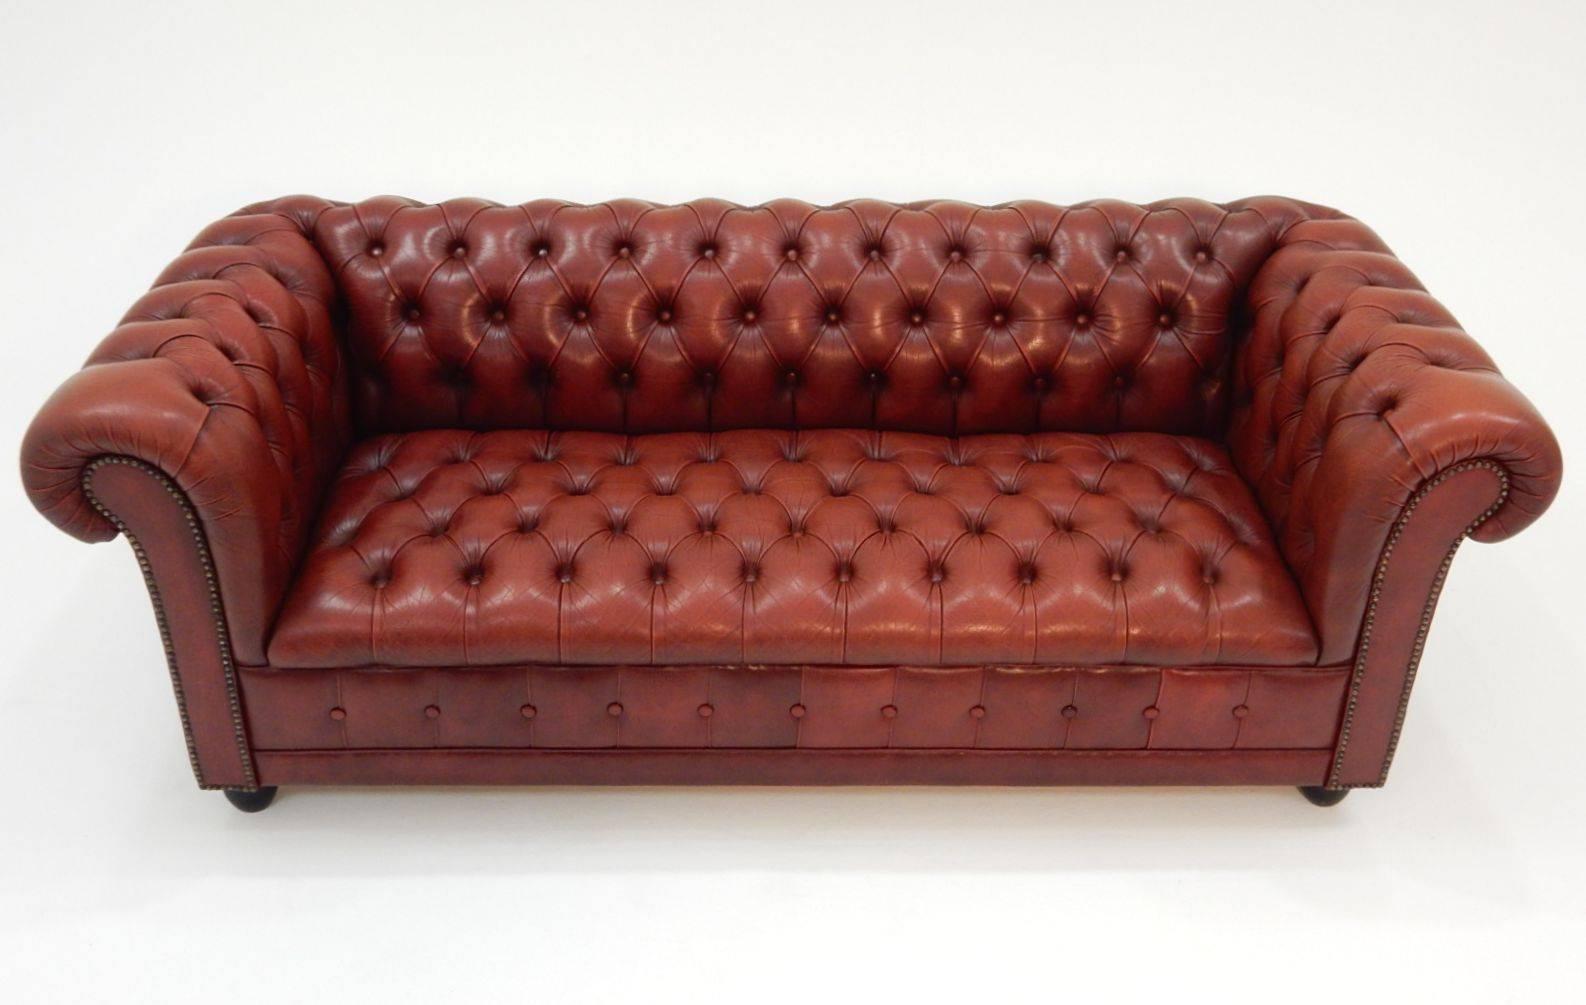 Beautiful vintage multi tufted red leather sofa in excellent condition with
gorgeous aged wear and grain that can't be faked.
Ready for use on delivery as you can see in photos.